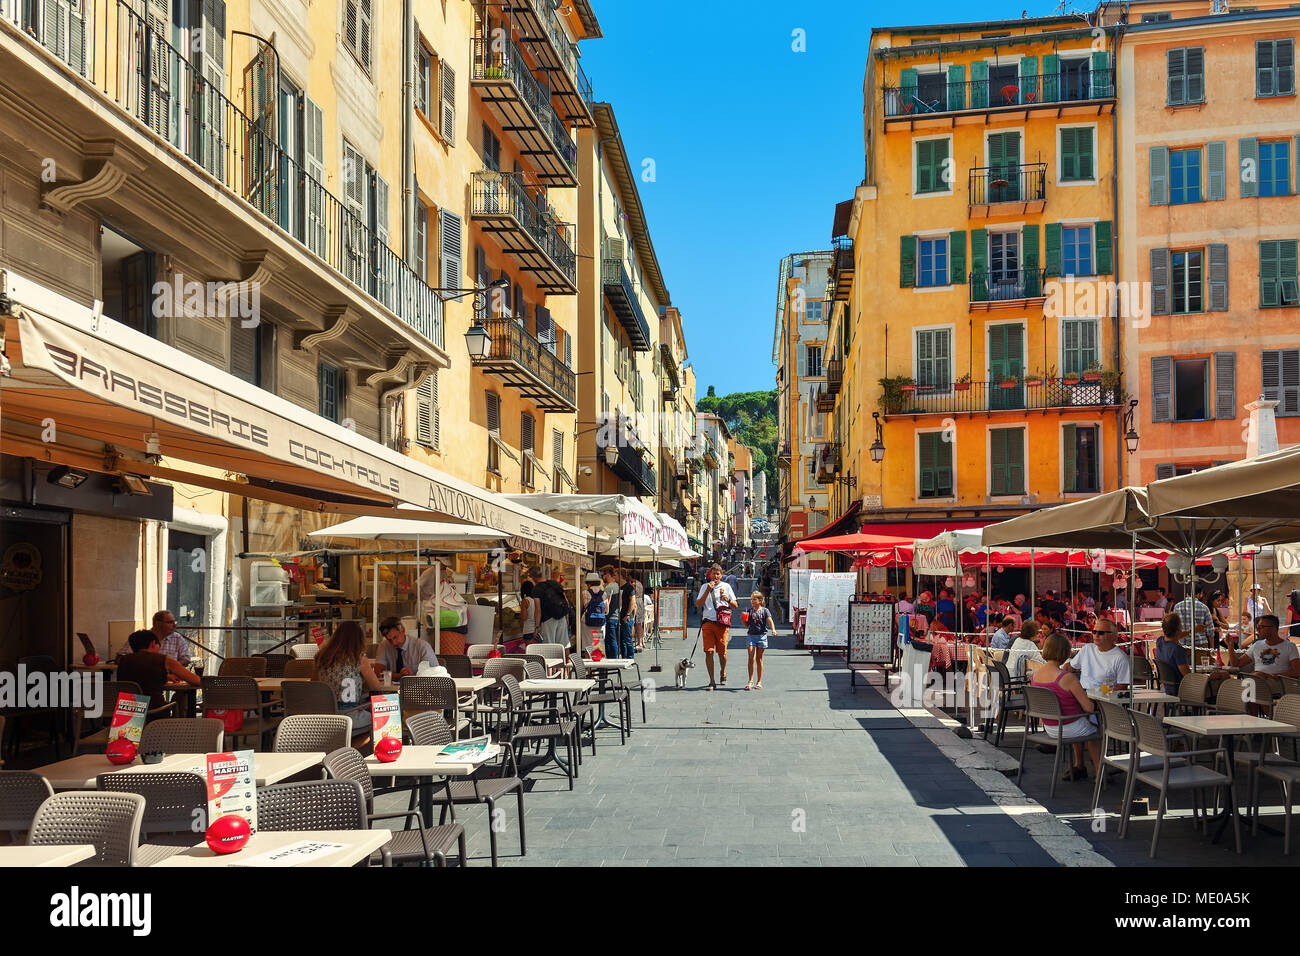 People sitting in outdoor restaurants on narrow street in Old town of Nice -  fifth most populous city in France. Stock Photo